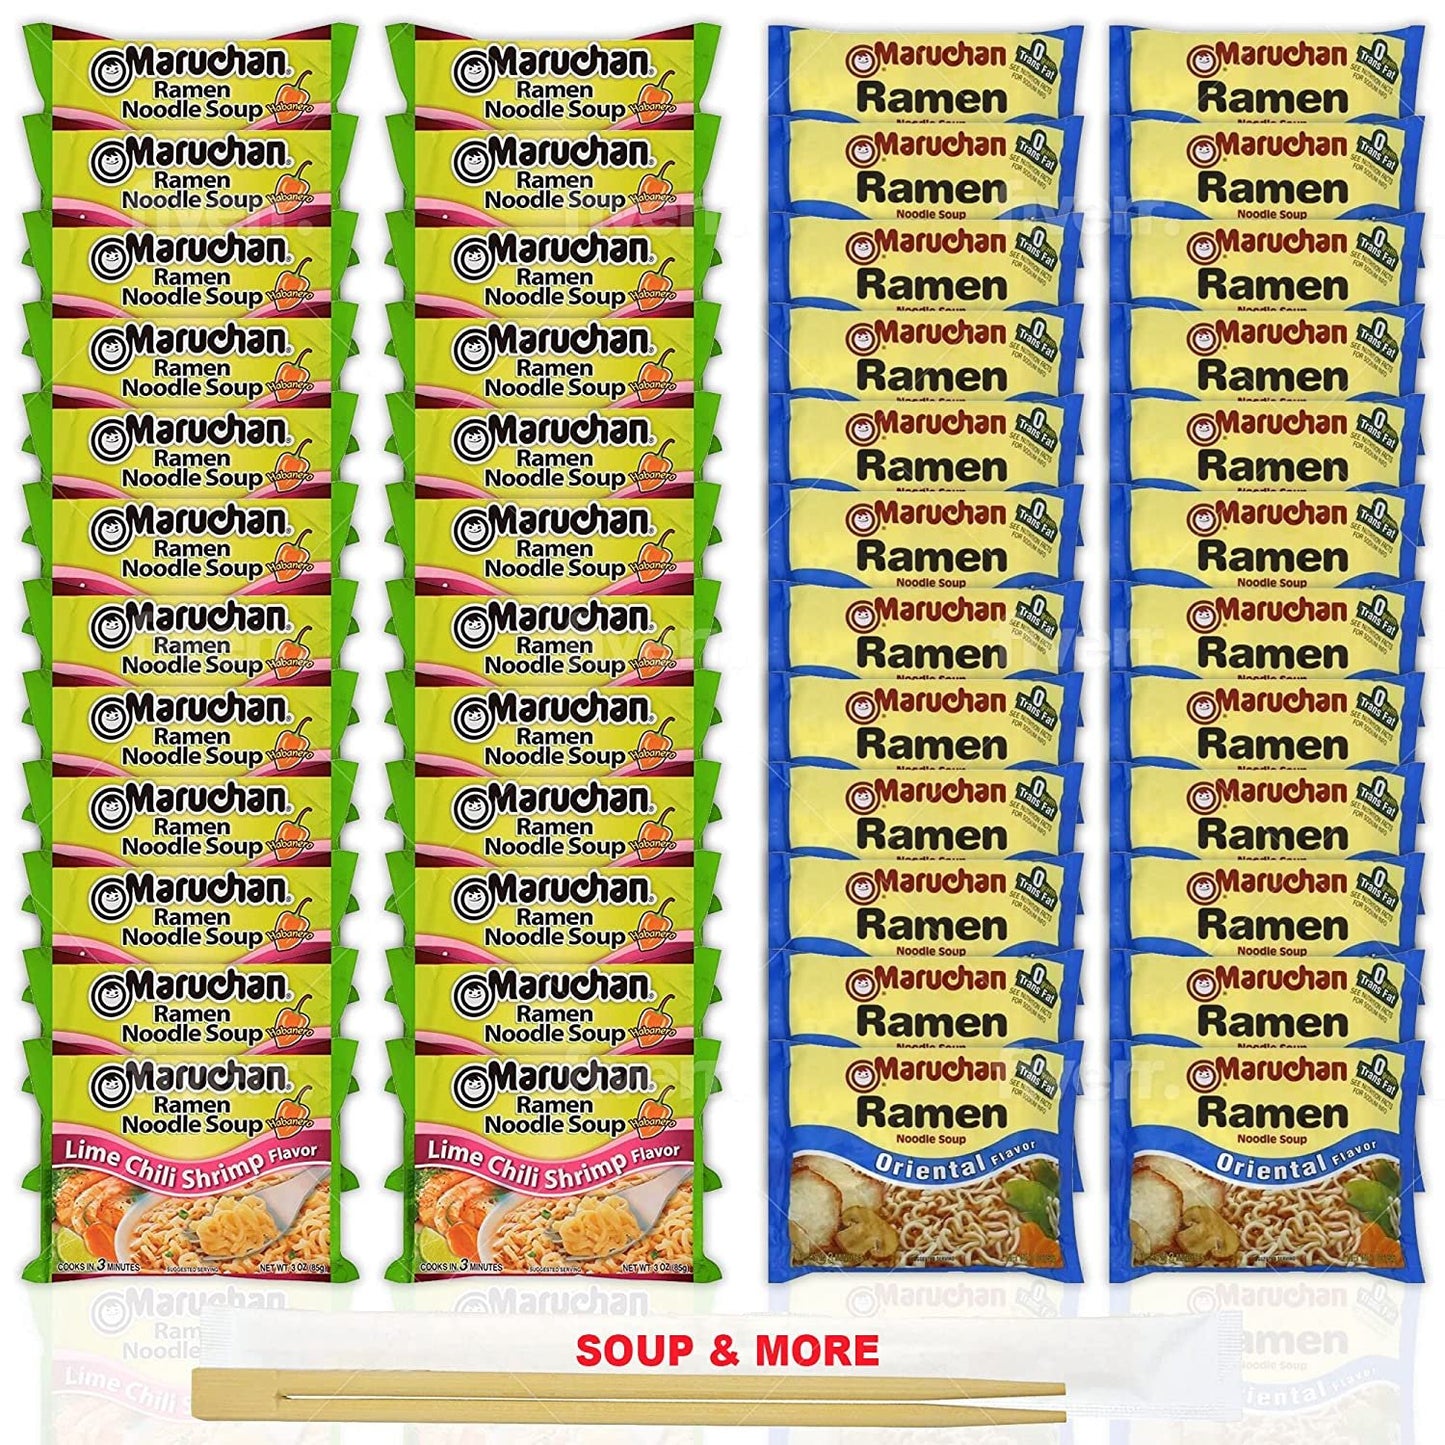 Maruchan Ramen Instant Noodle Soup Variety, 2 Flavors - 24 Packs Lime Chili Shrimp & 24 Packs Oriental , 3 Ounce Single Servings Lunch / Dinner Variety